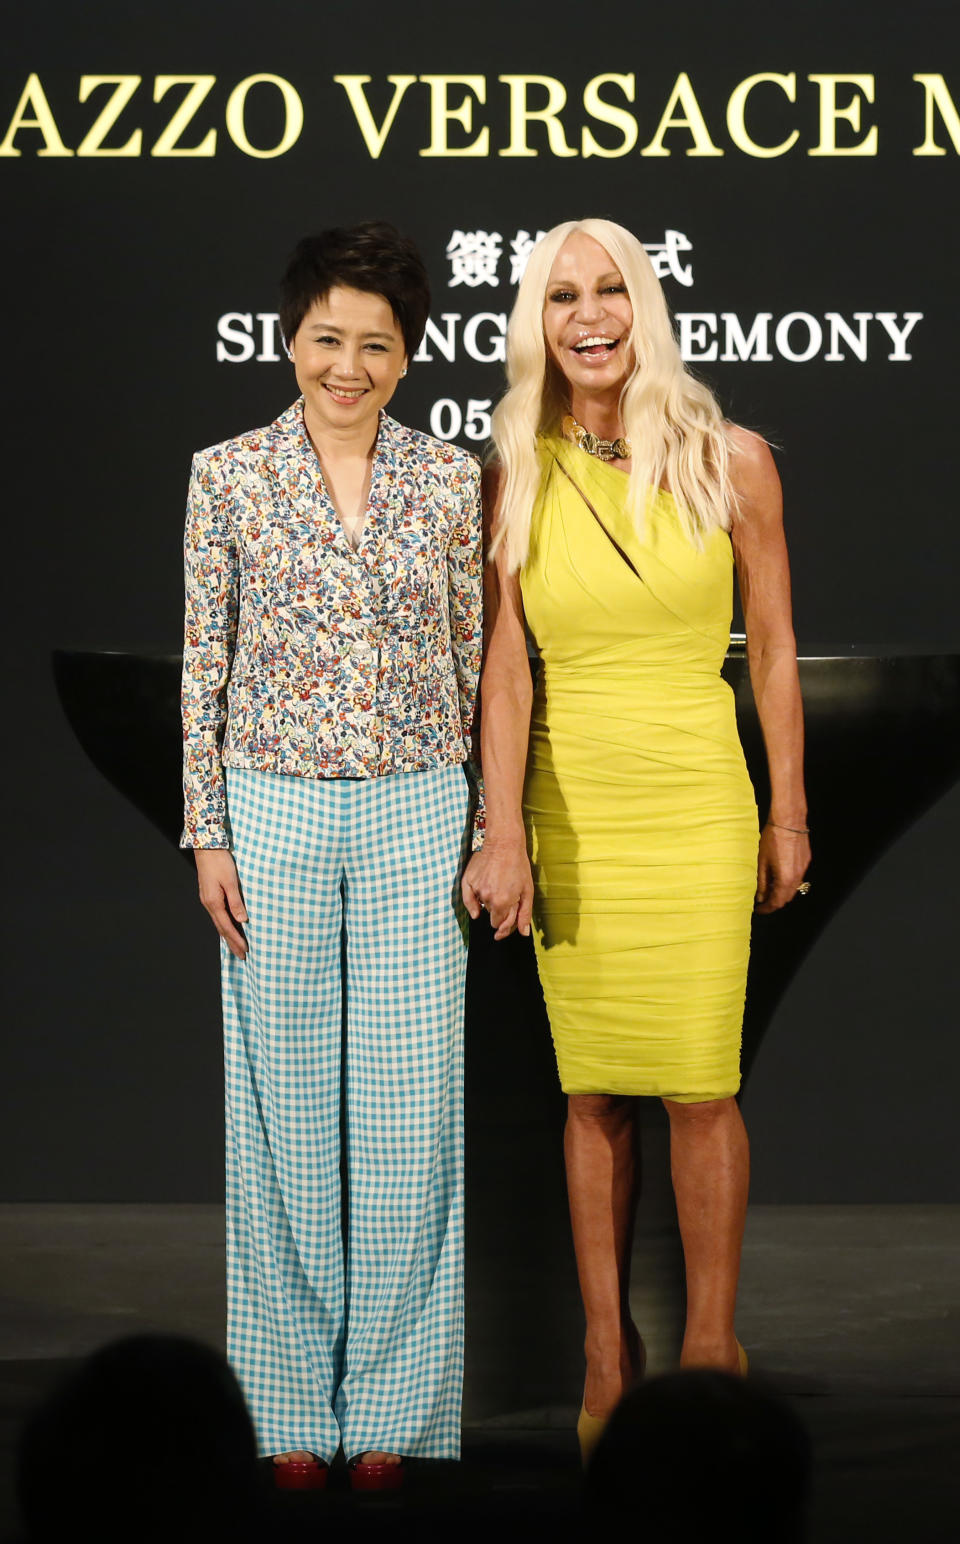 Angela Leong, Managing Director of SJM, left, poses with Donatella Versace during the Palazzo Versace Macau signing ceremony in Macau Thursday, Sept. 5, 2013. Italian fashion house Versace and Macau casino company SJM said the Versace-themed hotel they're planning for the Asian gambling city will be tweaked to appeal to the local Chinese market and open in 2017. Versace and SJM Holdings signed a deal last month to build the hotel at SJM's Cotai resort in Macau. (AP Photo/Kin Cheung)